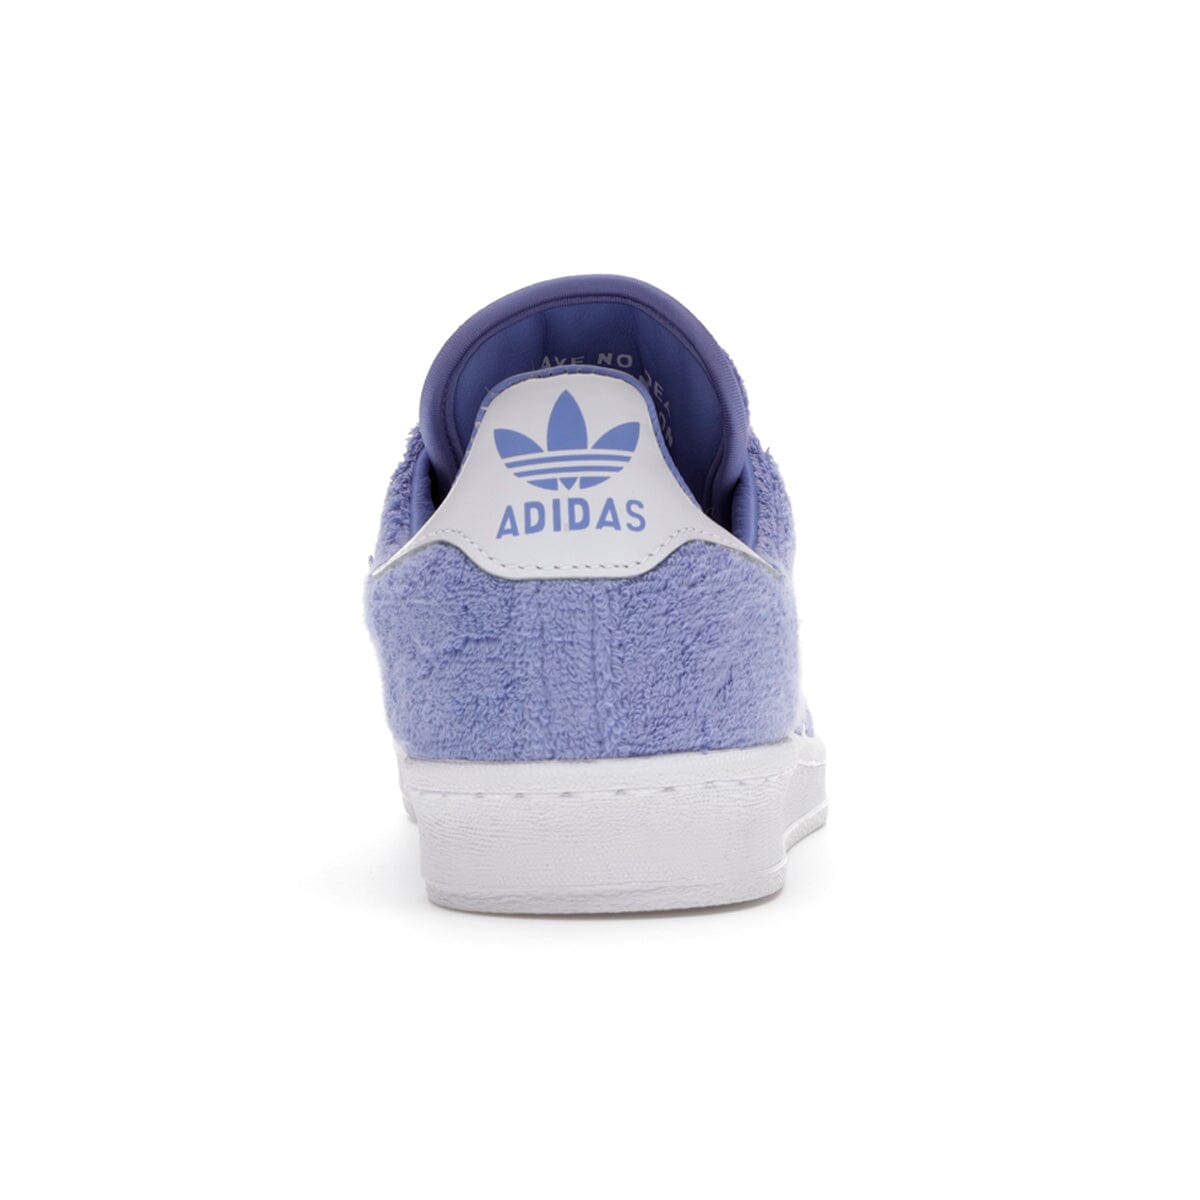 Adidas Campus 80s South Park Towelie Adidas Blizz Sneakers 